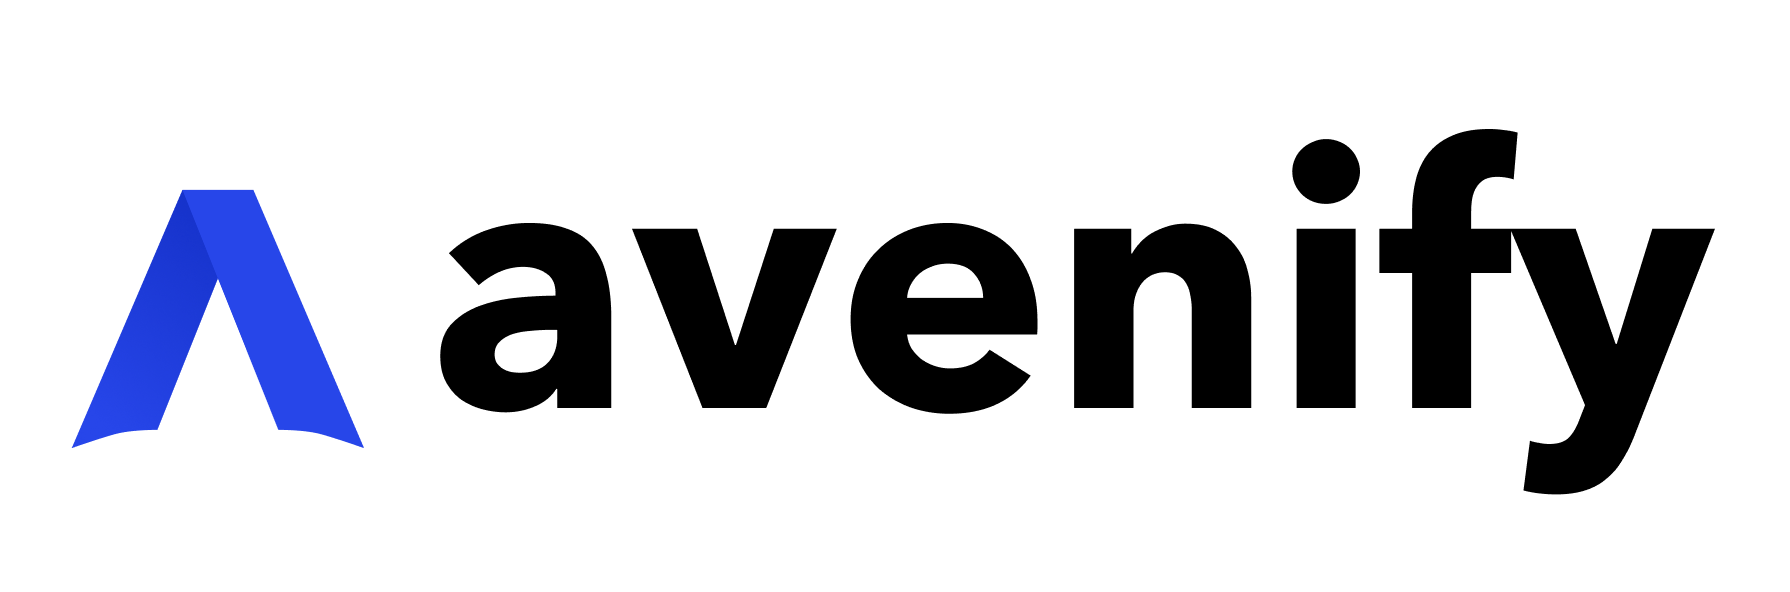 Logo for Avenify with blue emblem and black font